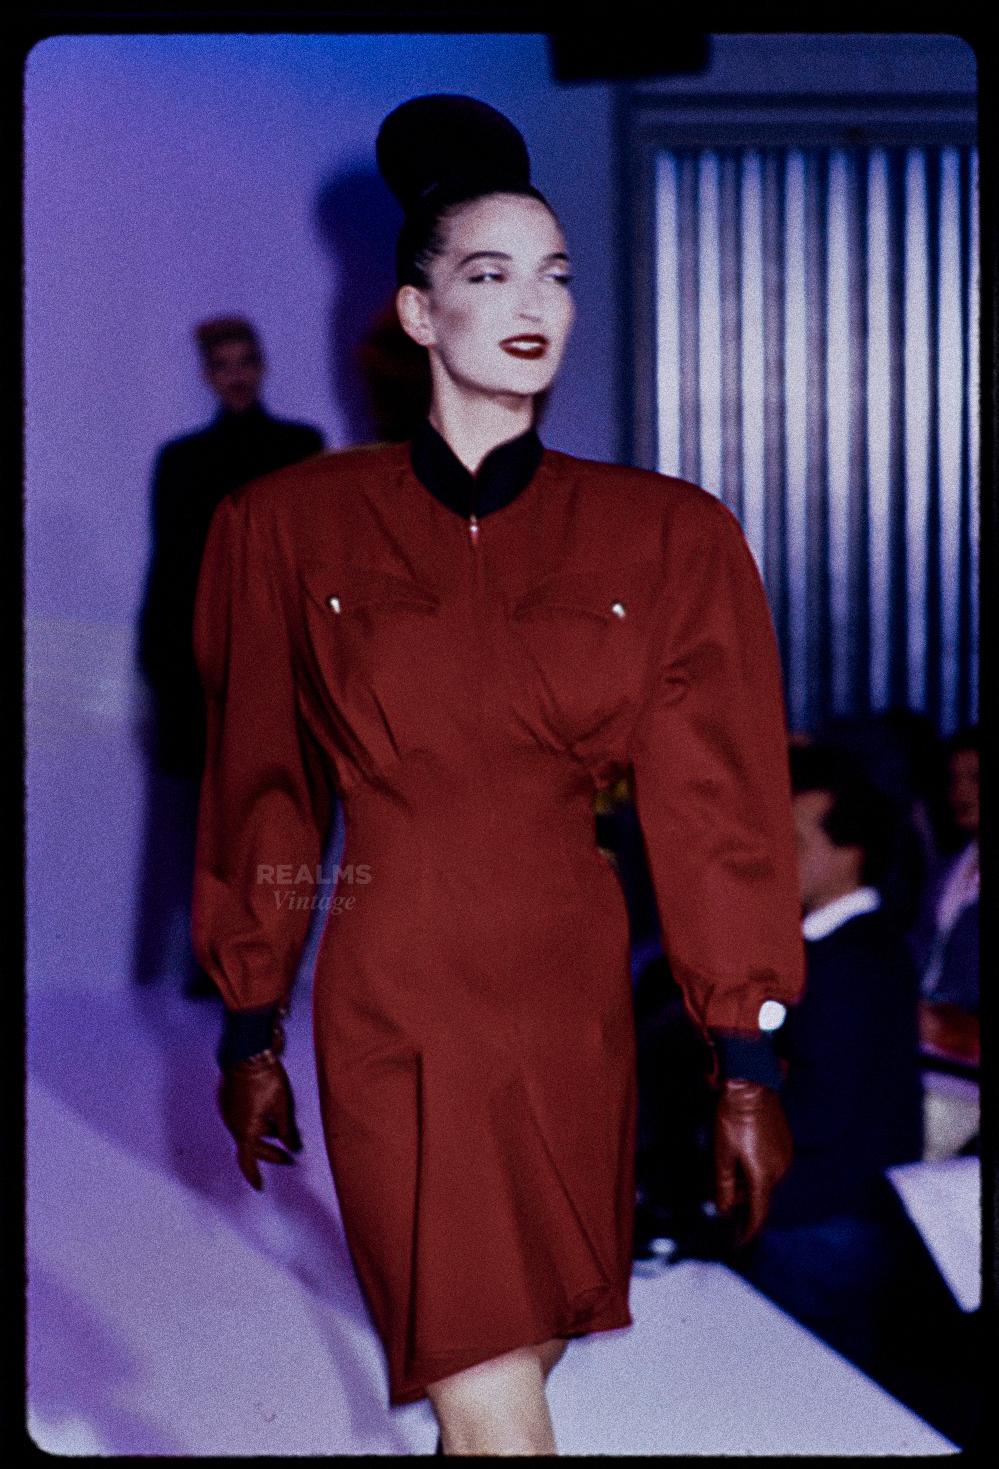 Museum worthy piece of Fashion History

Thierry Mugler FW1986 Collection, documented on the iconic Runway Show. 
The famous ‘Les Milteuses’ dresses.
Extraordinairy construction of the one and only virtuoso Manfed Thierry Mugler. Hyper feminine